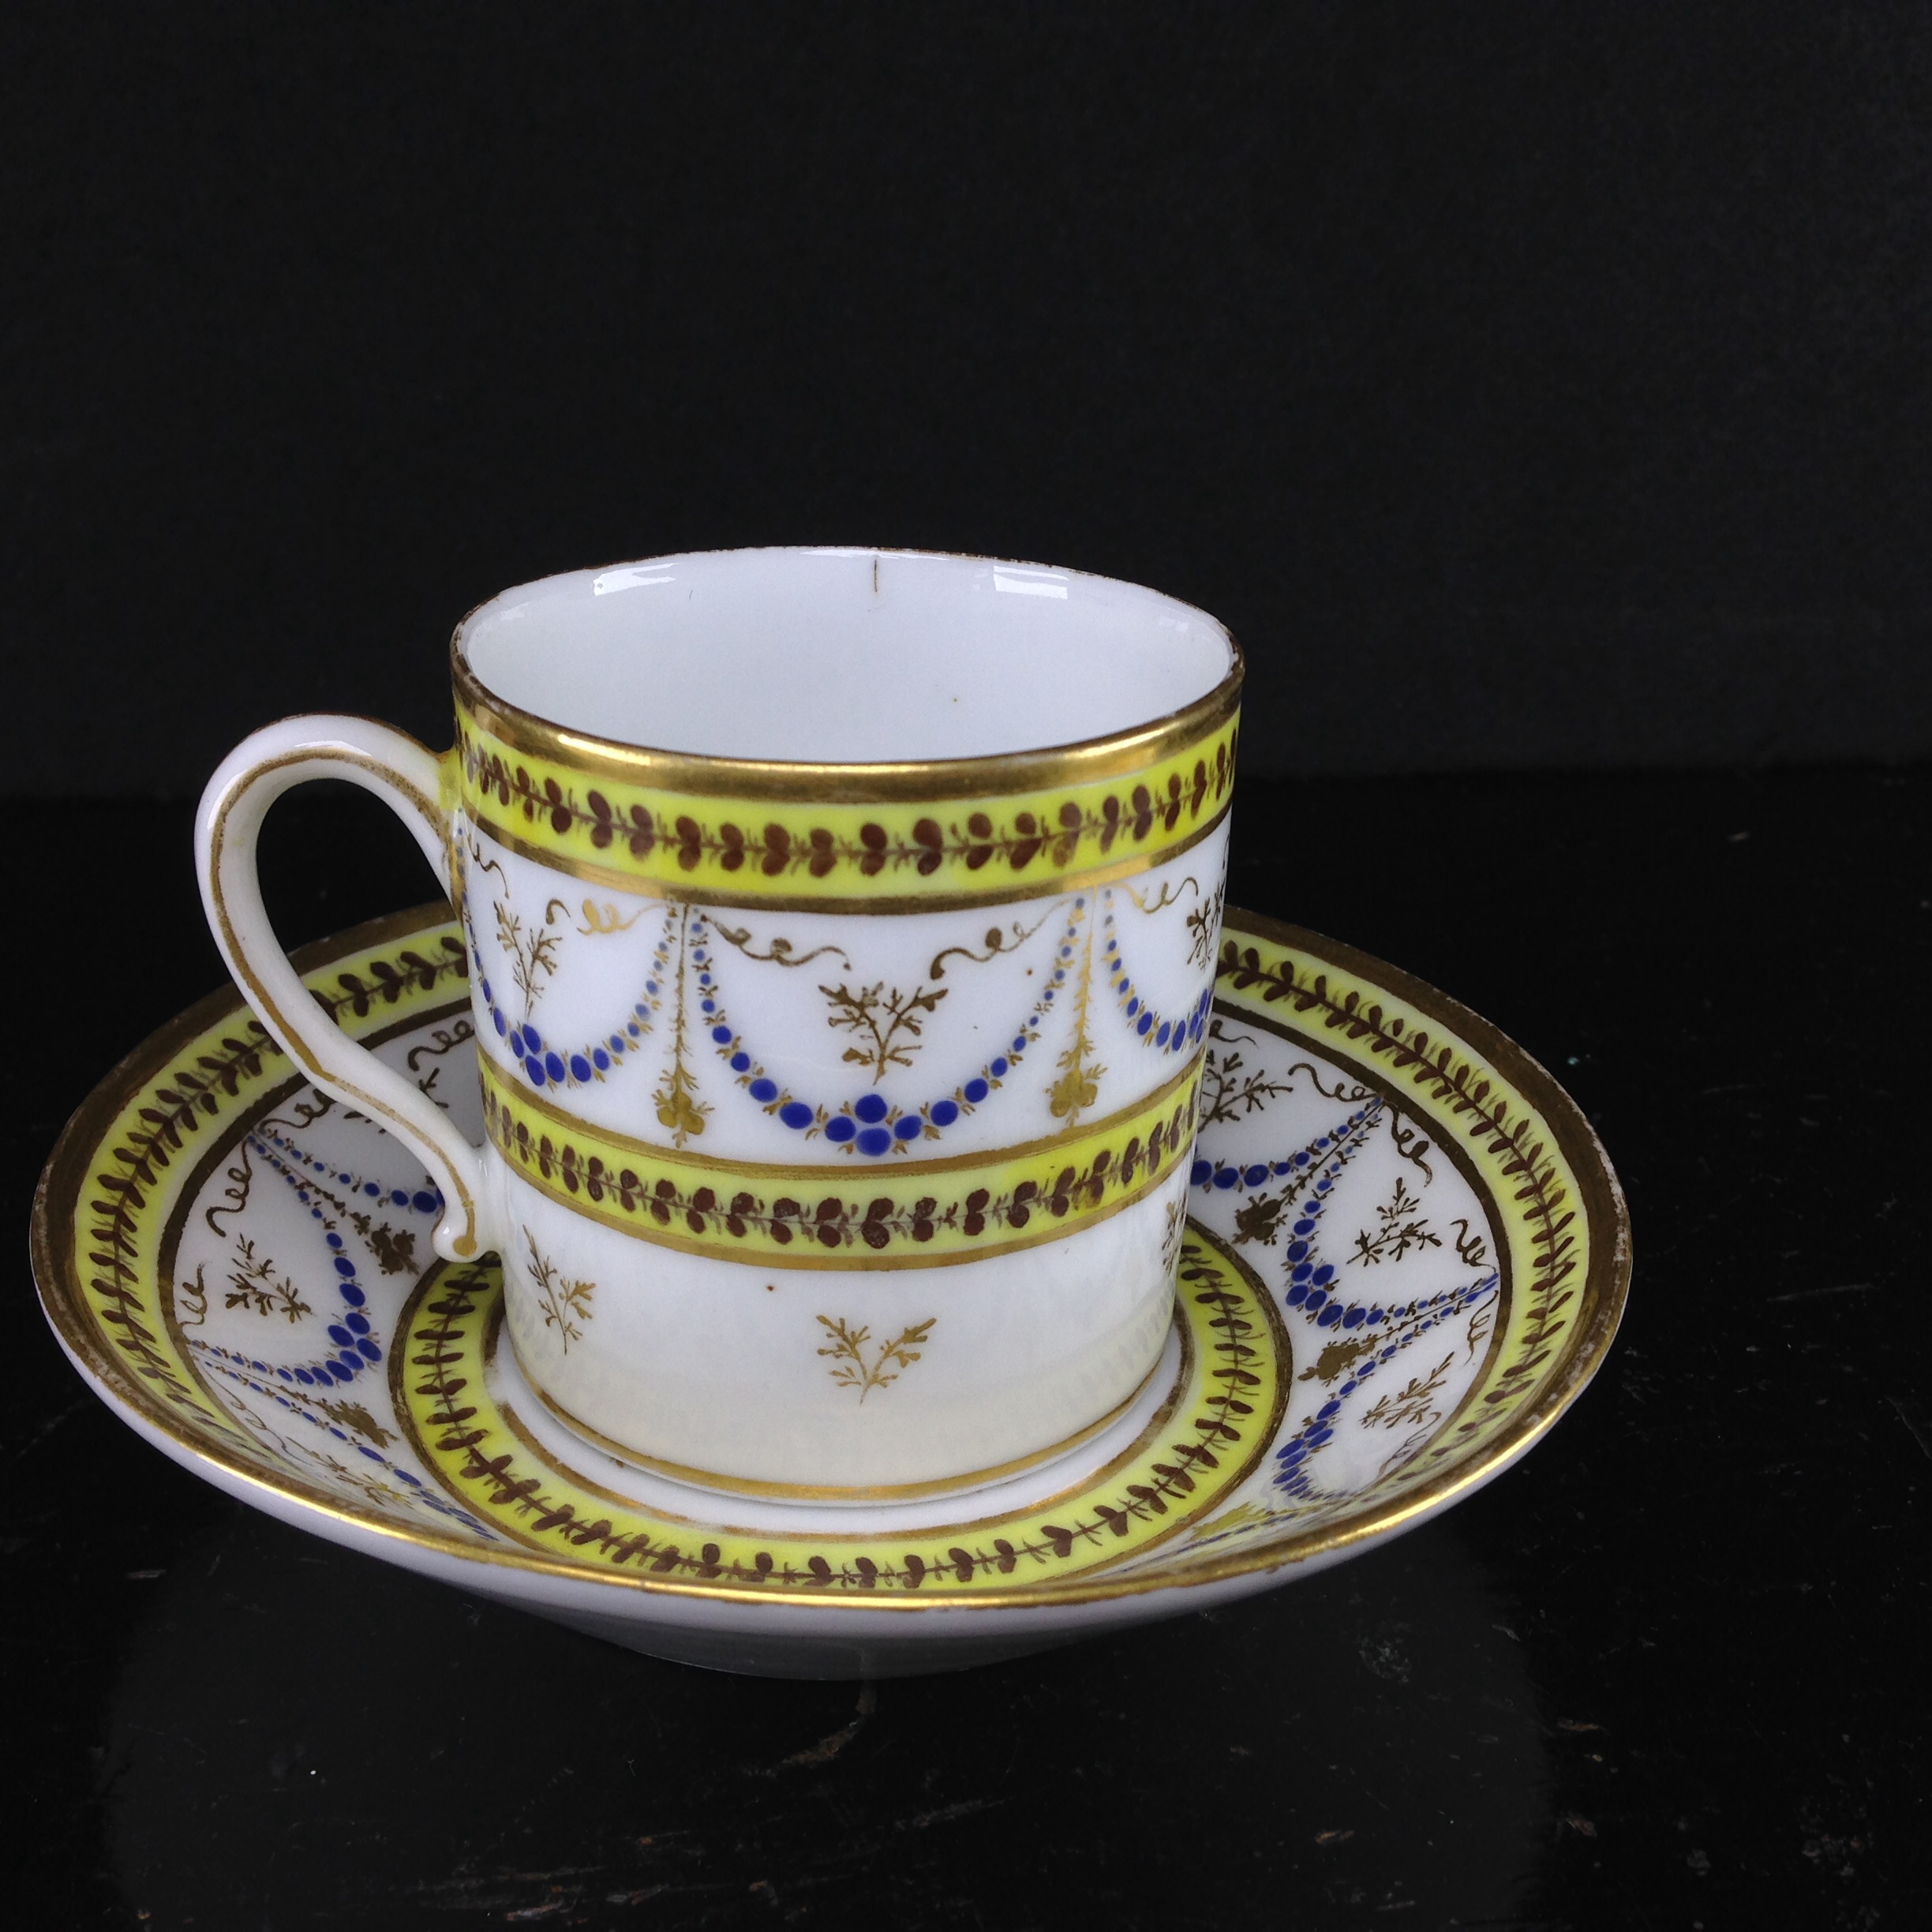 Nast coffee cup & saucer, classical, c.1785